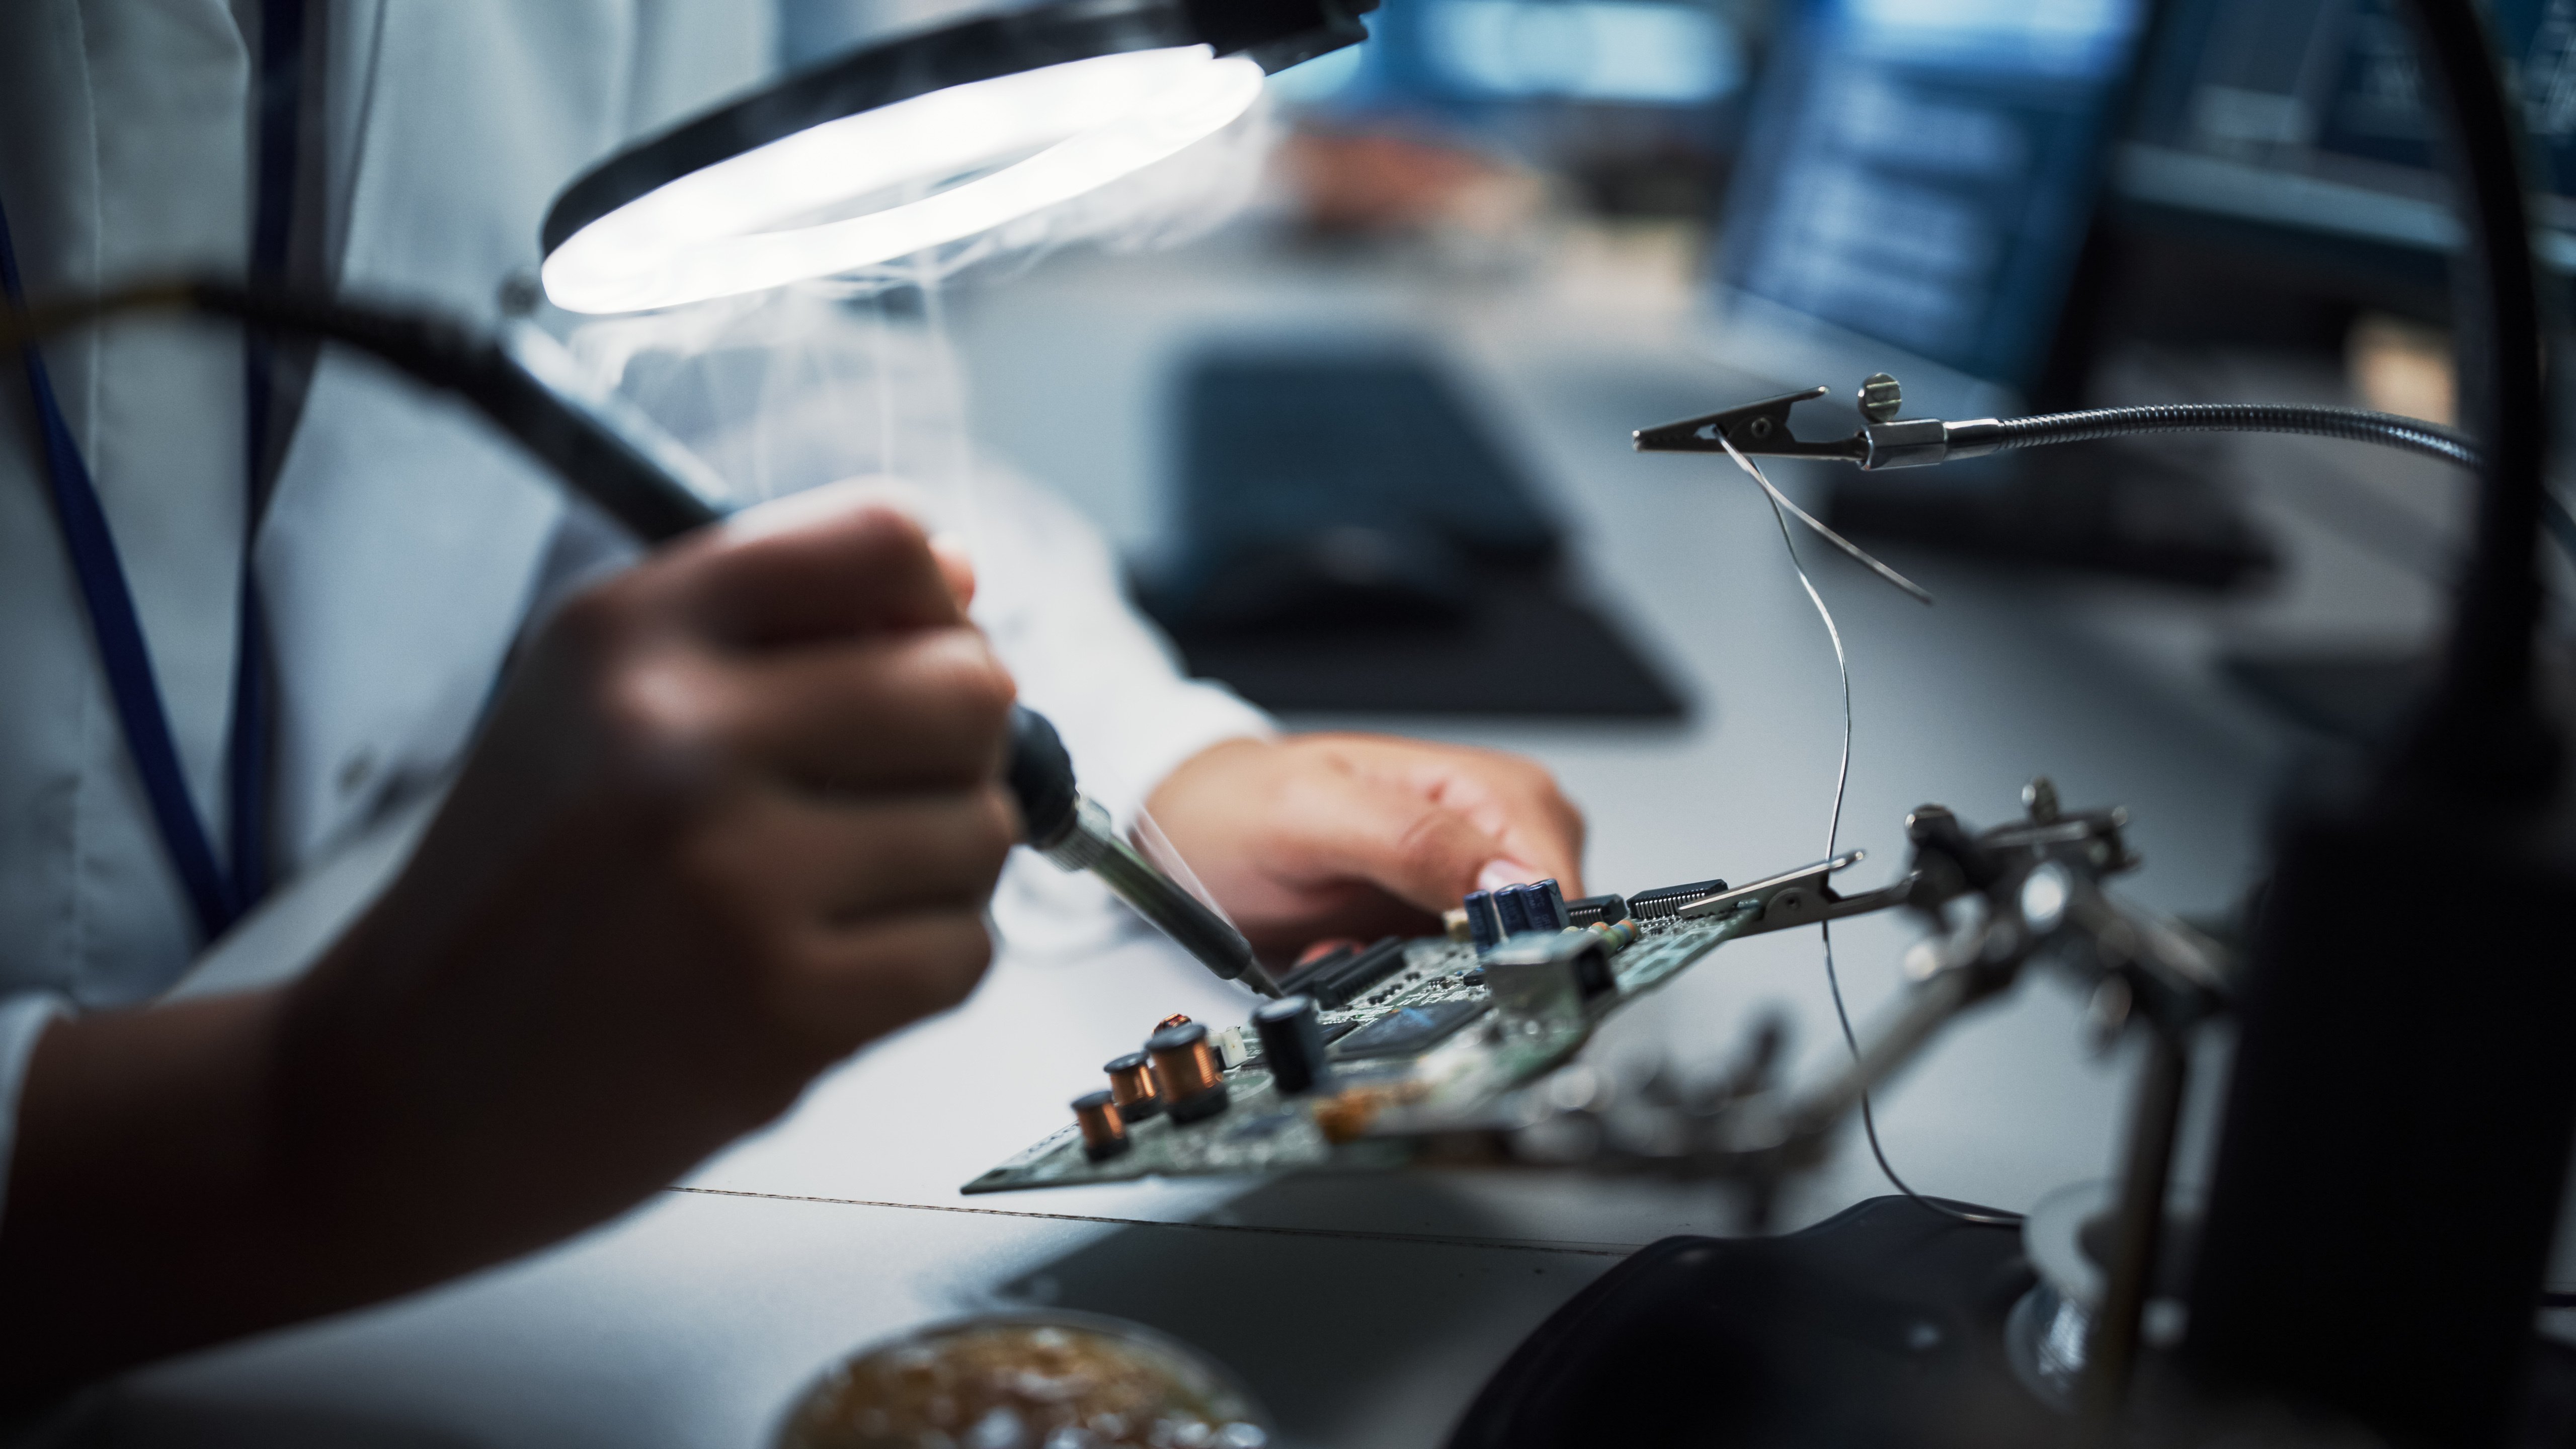 5 Common Solder Mistakes and How to Resolve Them